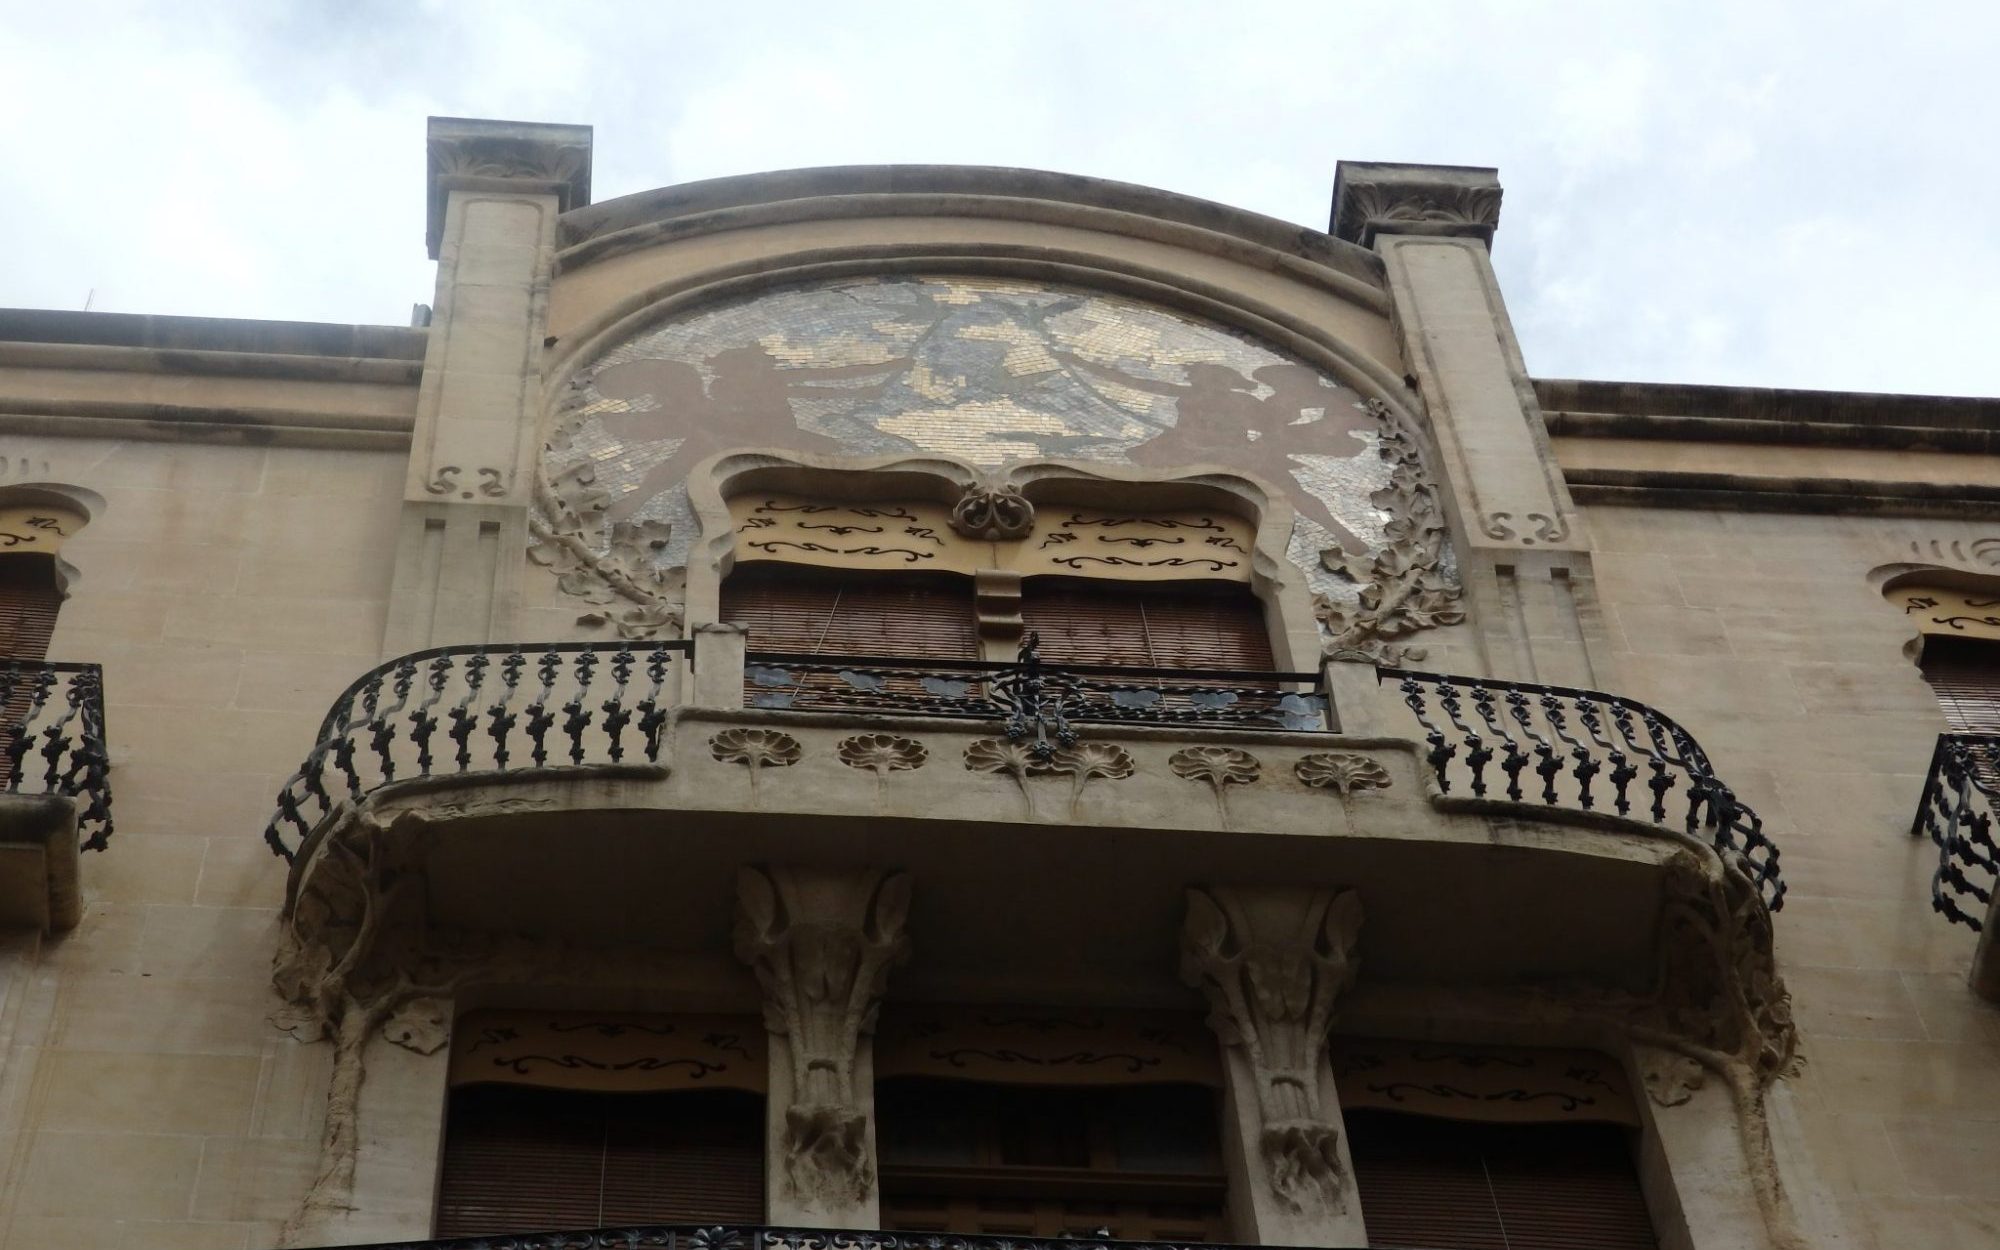 You can see a similarity to Art Nouveau and Jugendstil in the artwork on the facade of this building.